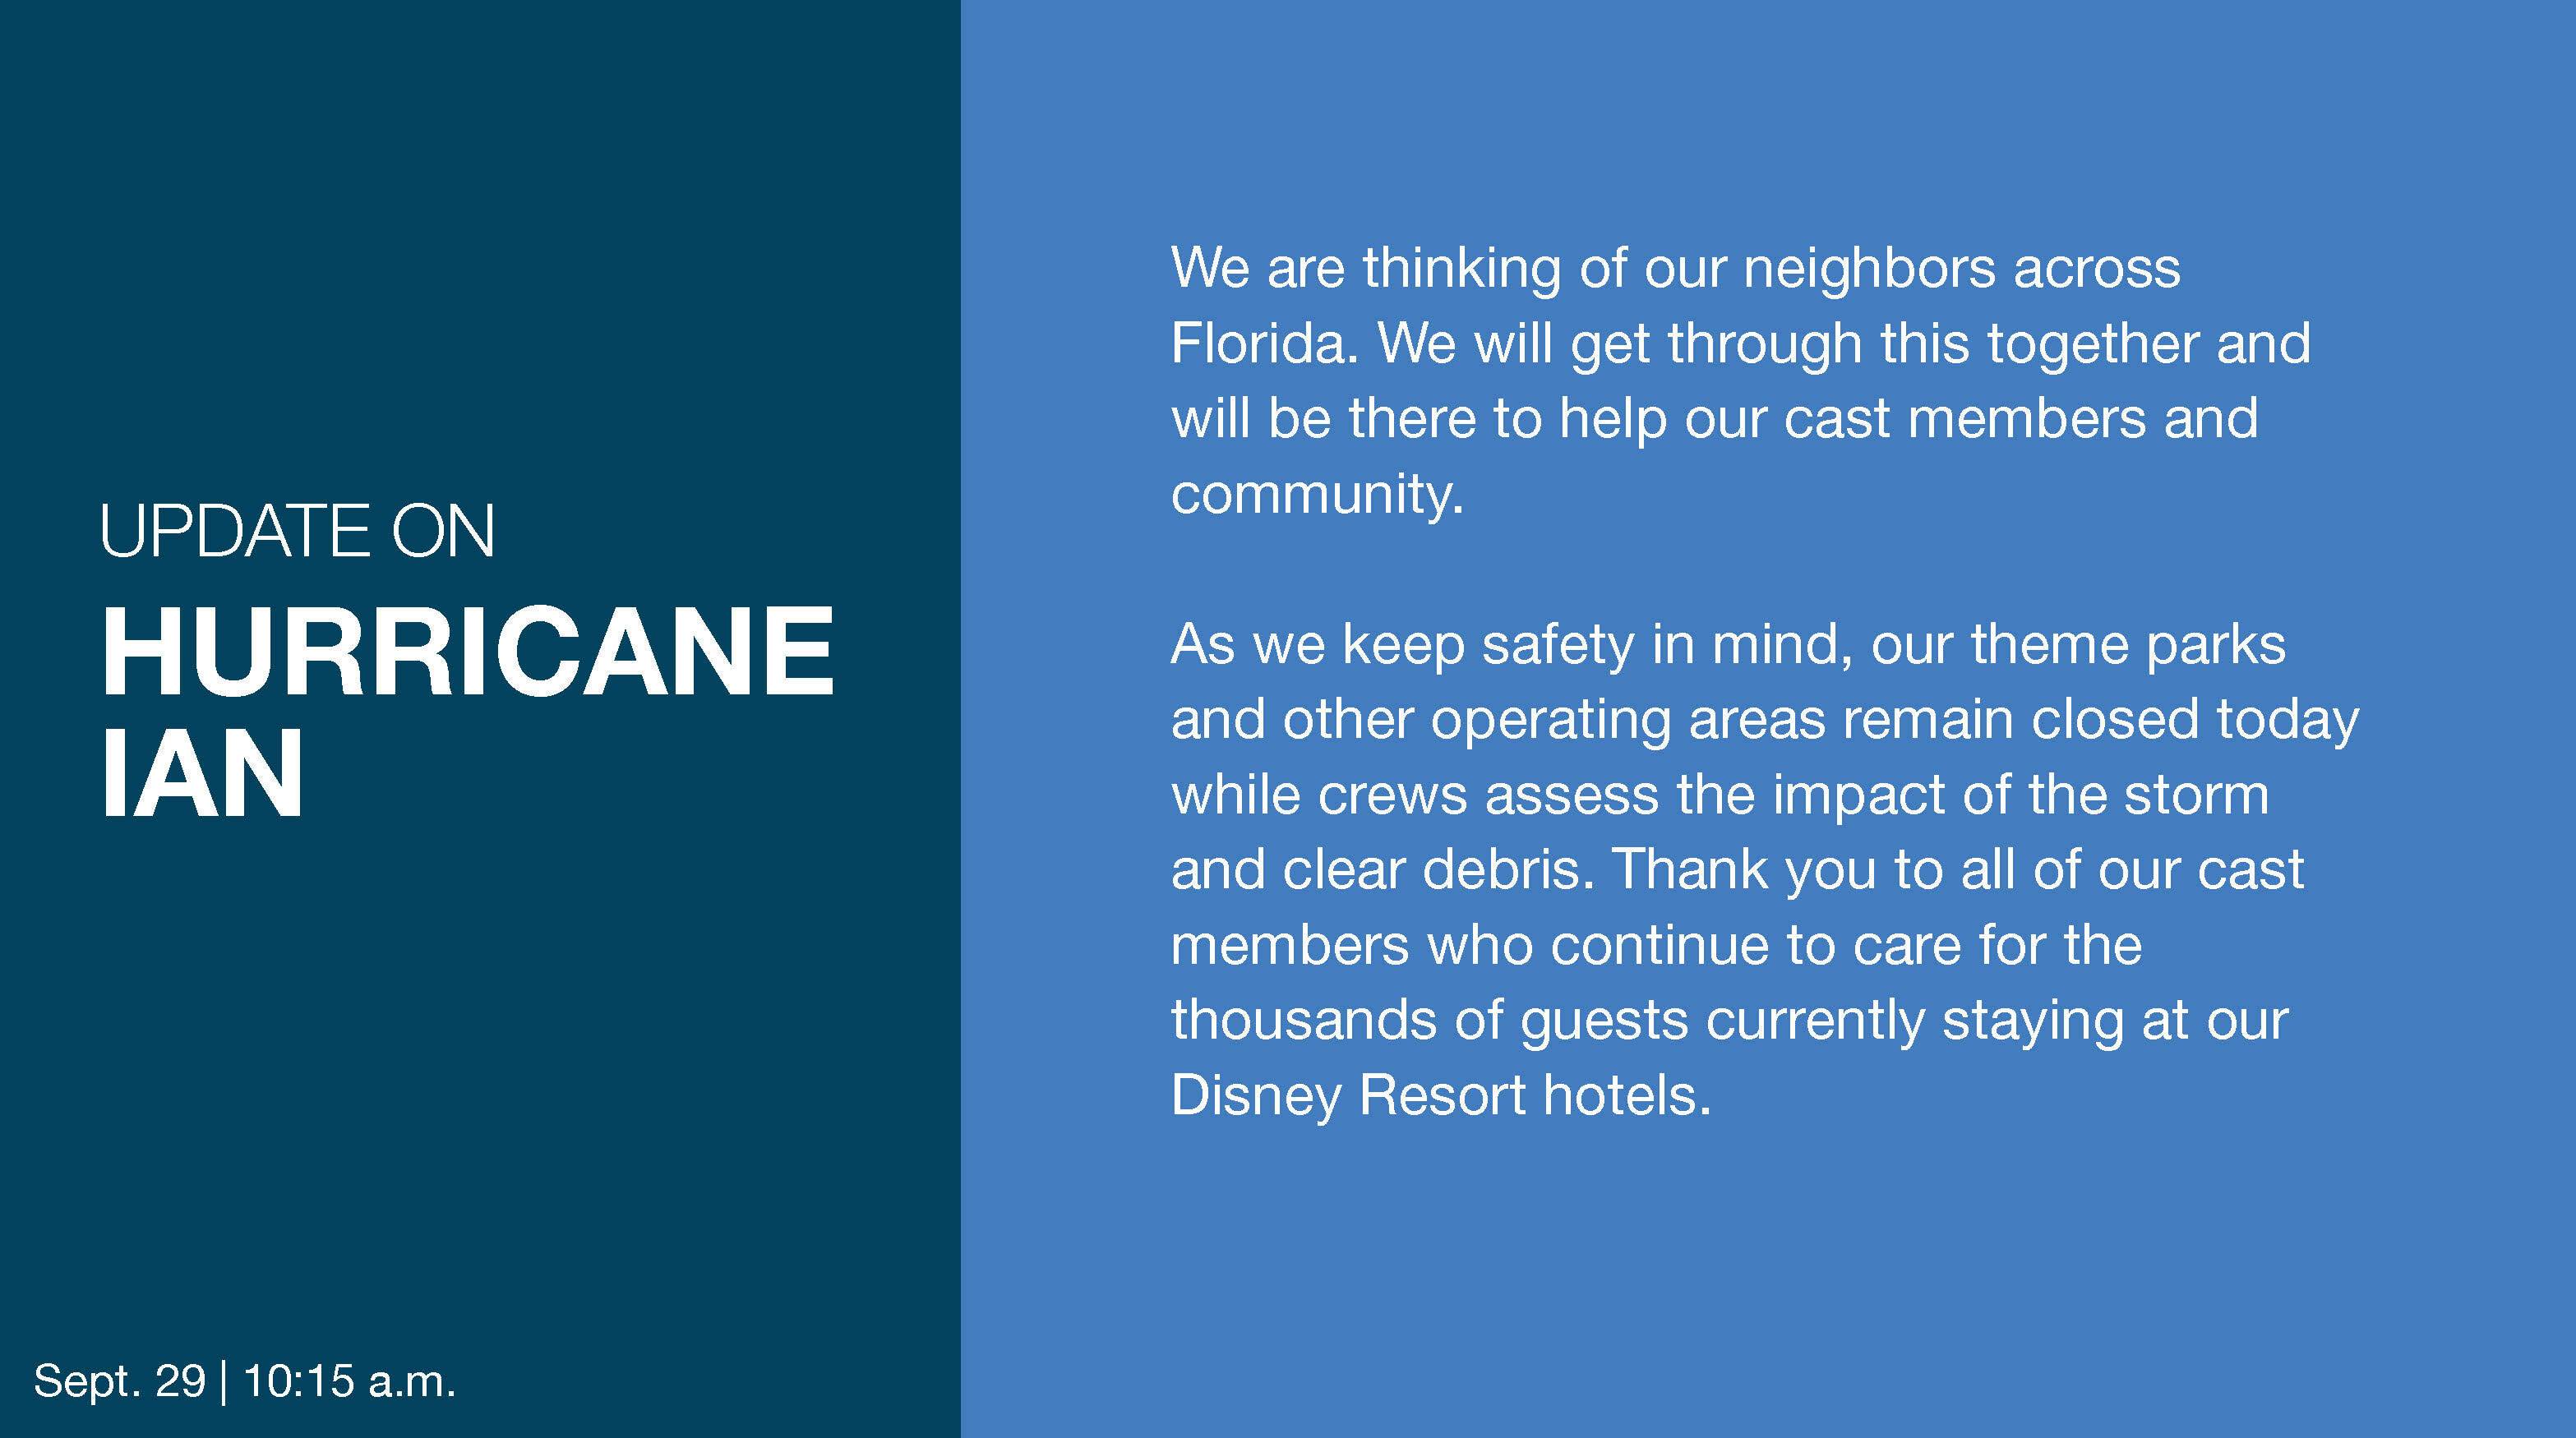 Disney releases statement with an update on Hurricane Ian